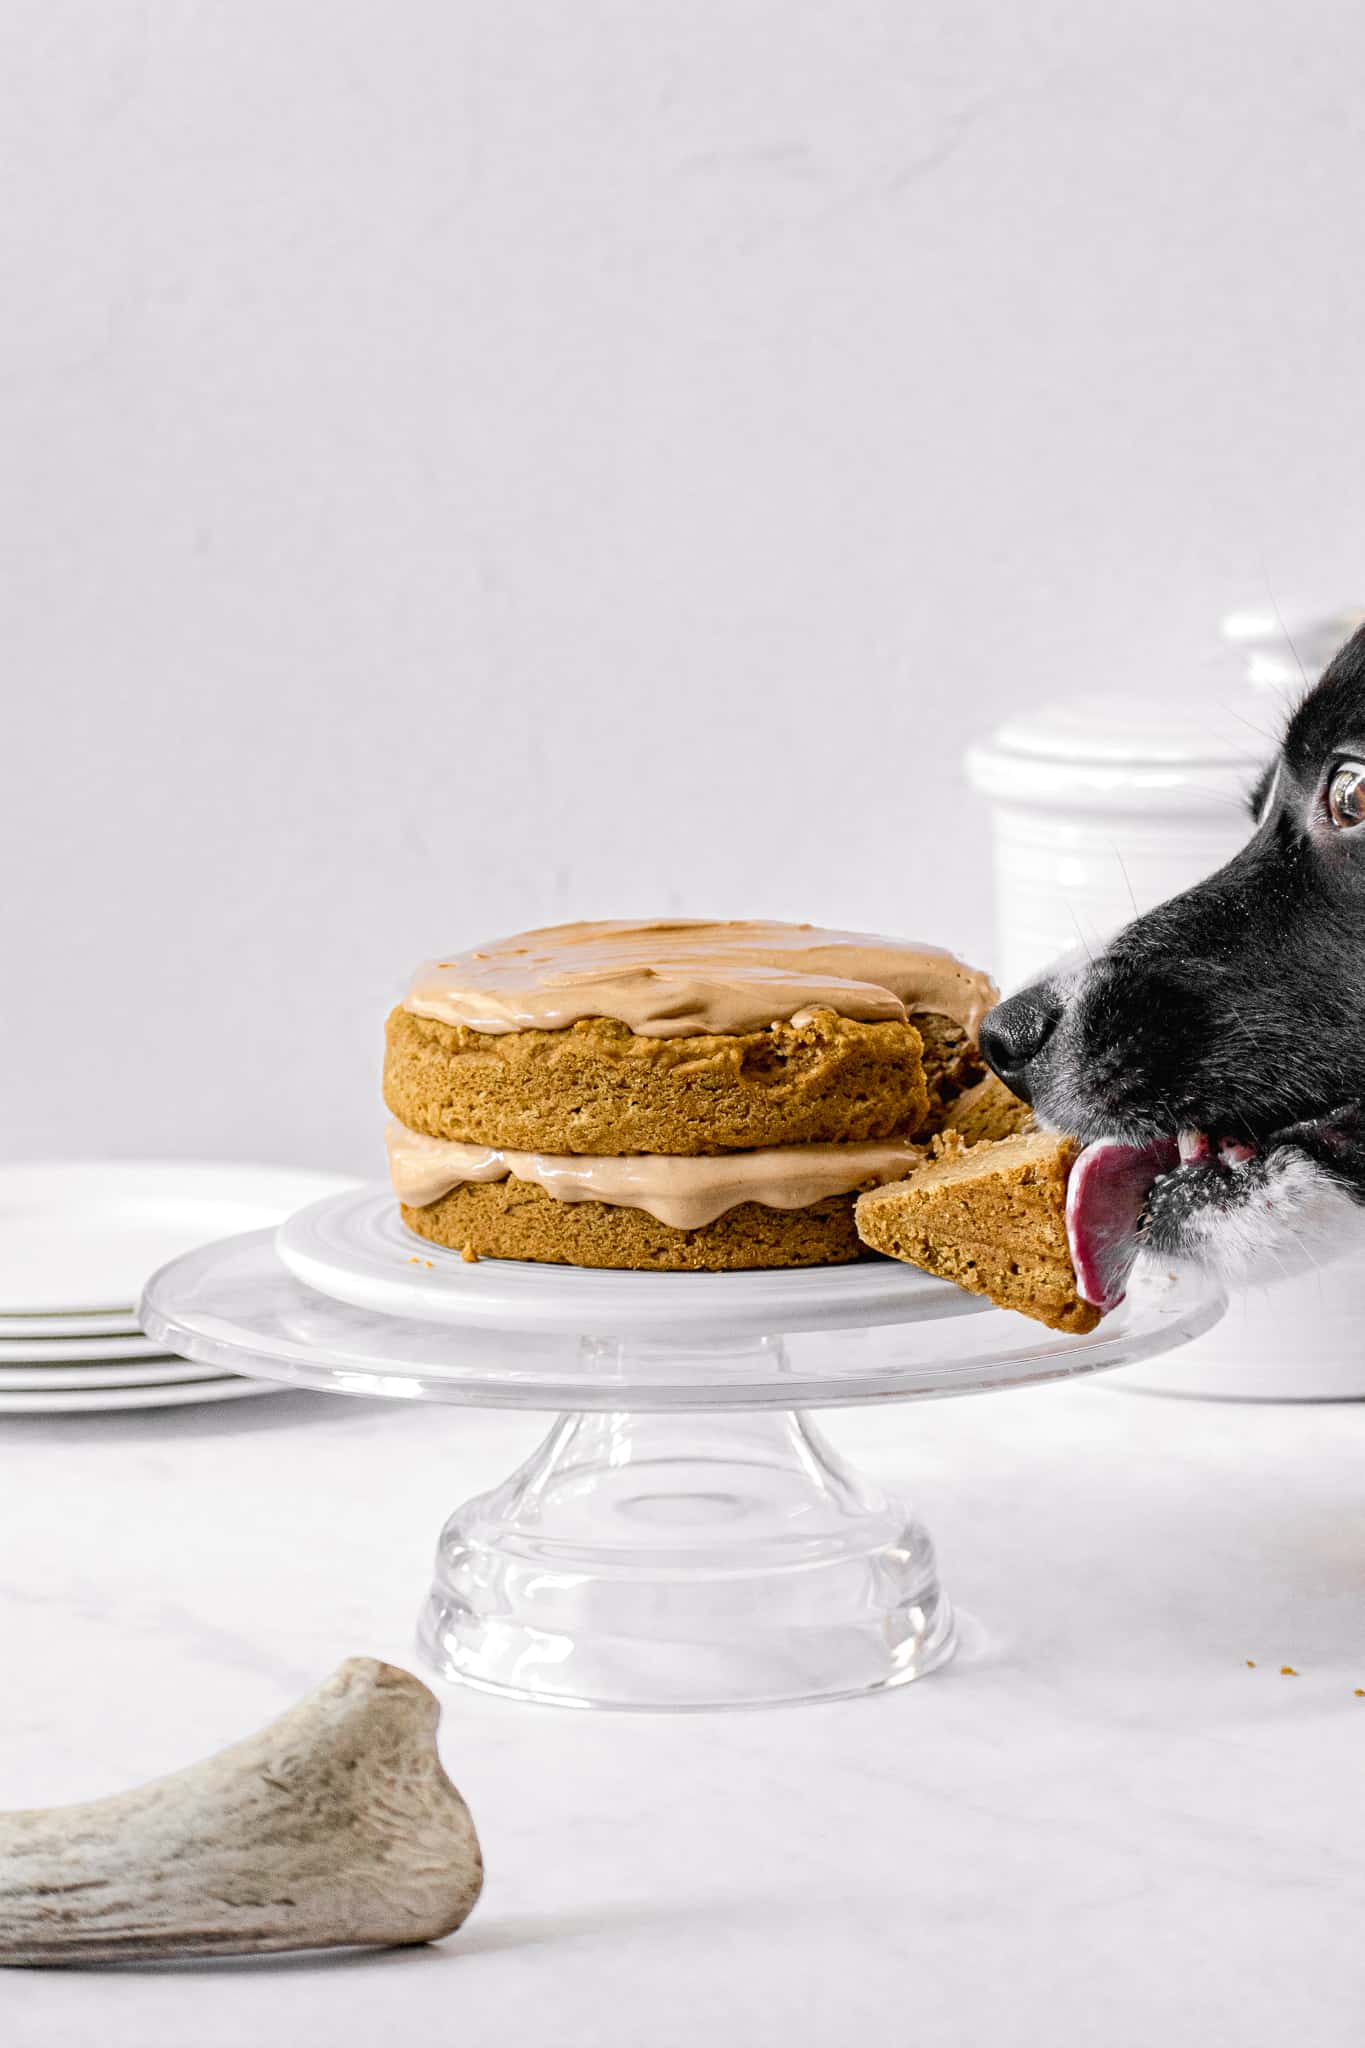 prepared dog birthday cake on a glass stand with dog licking a slice.